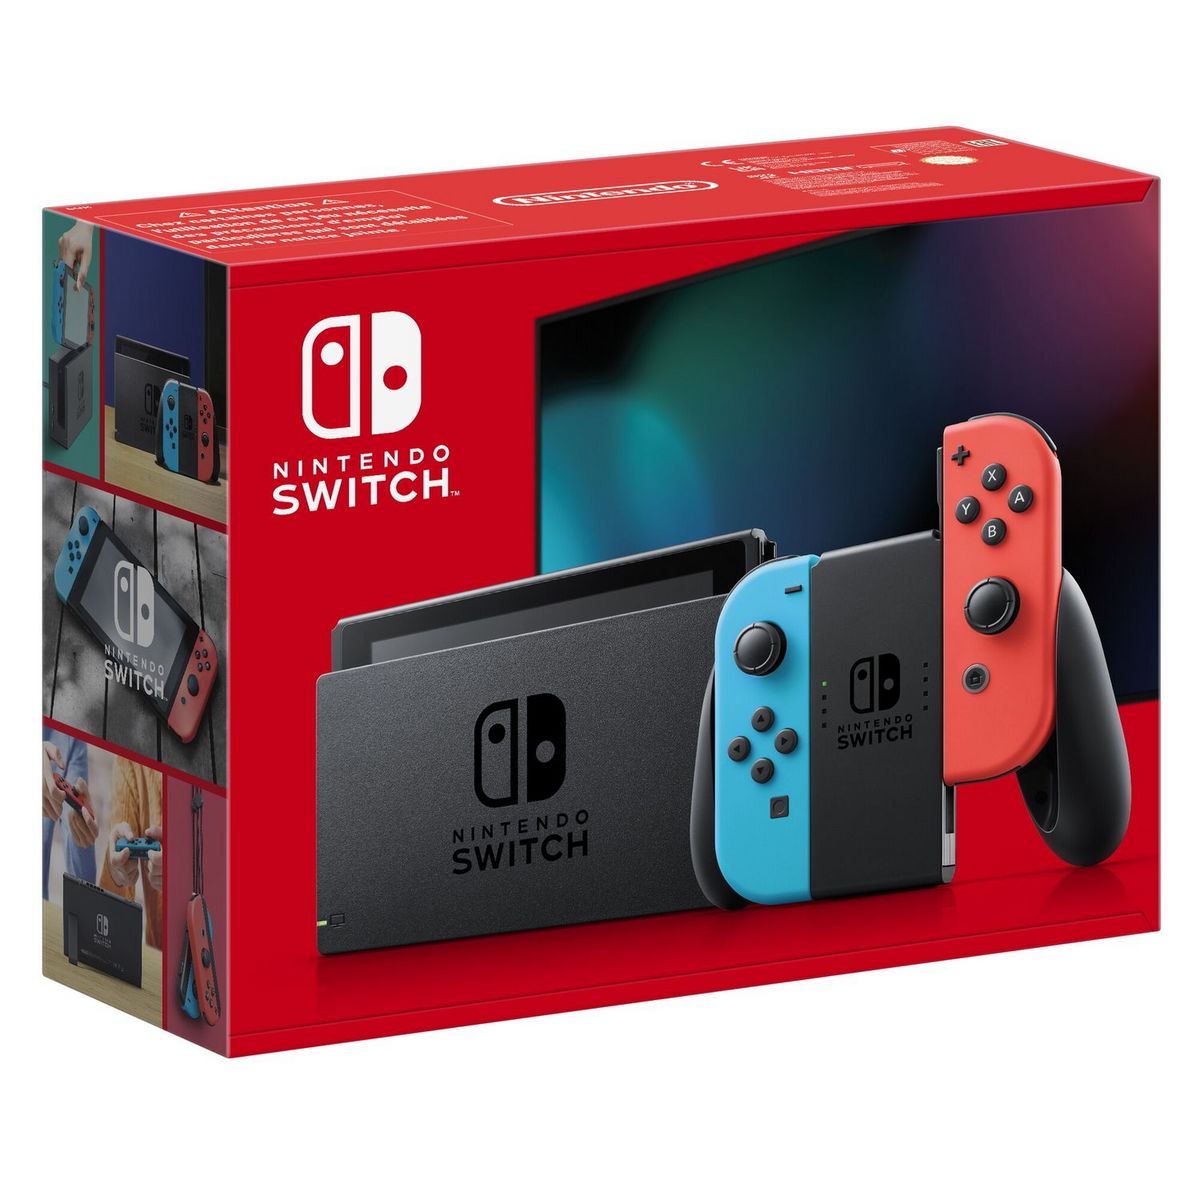 Console Nintendo Switch 1.2 Neon Red/Blue